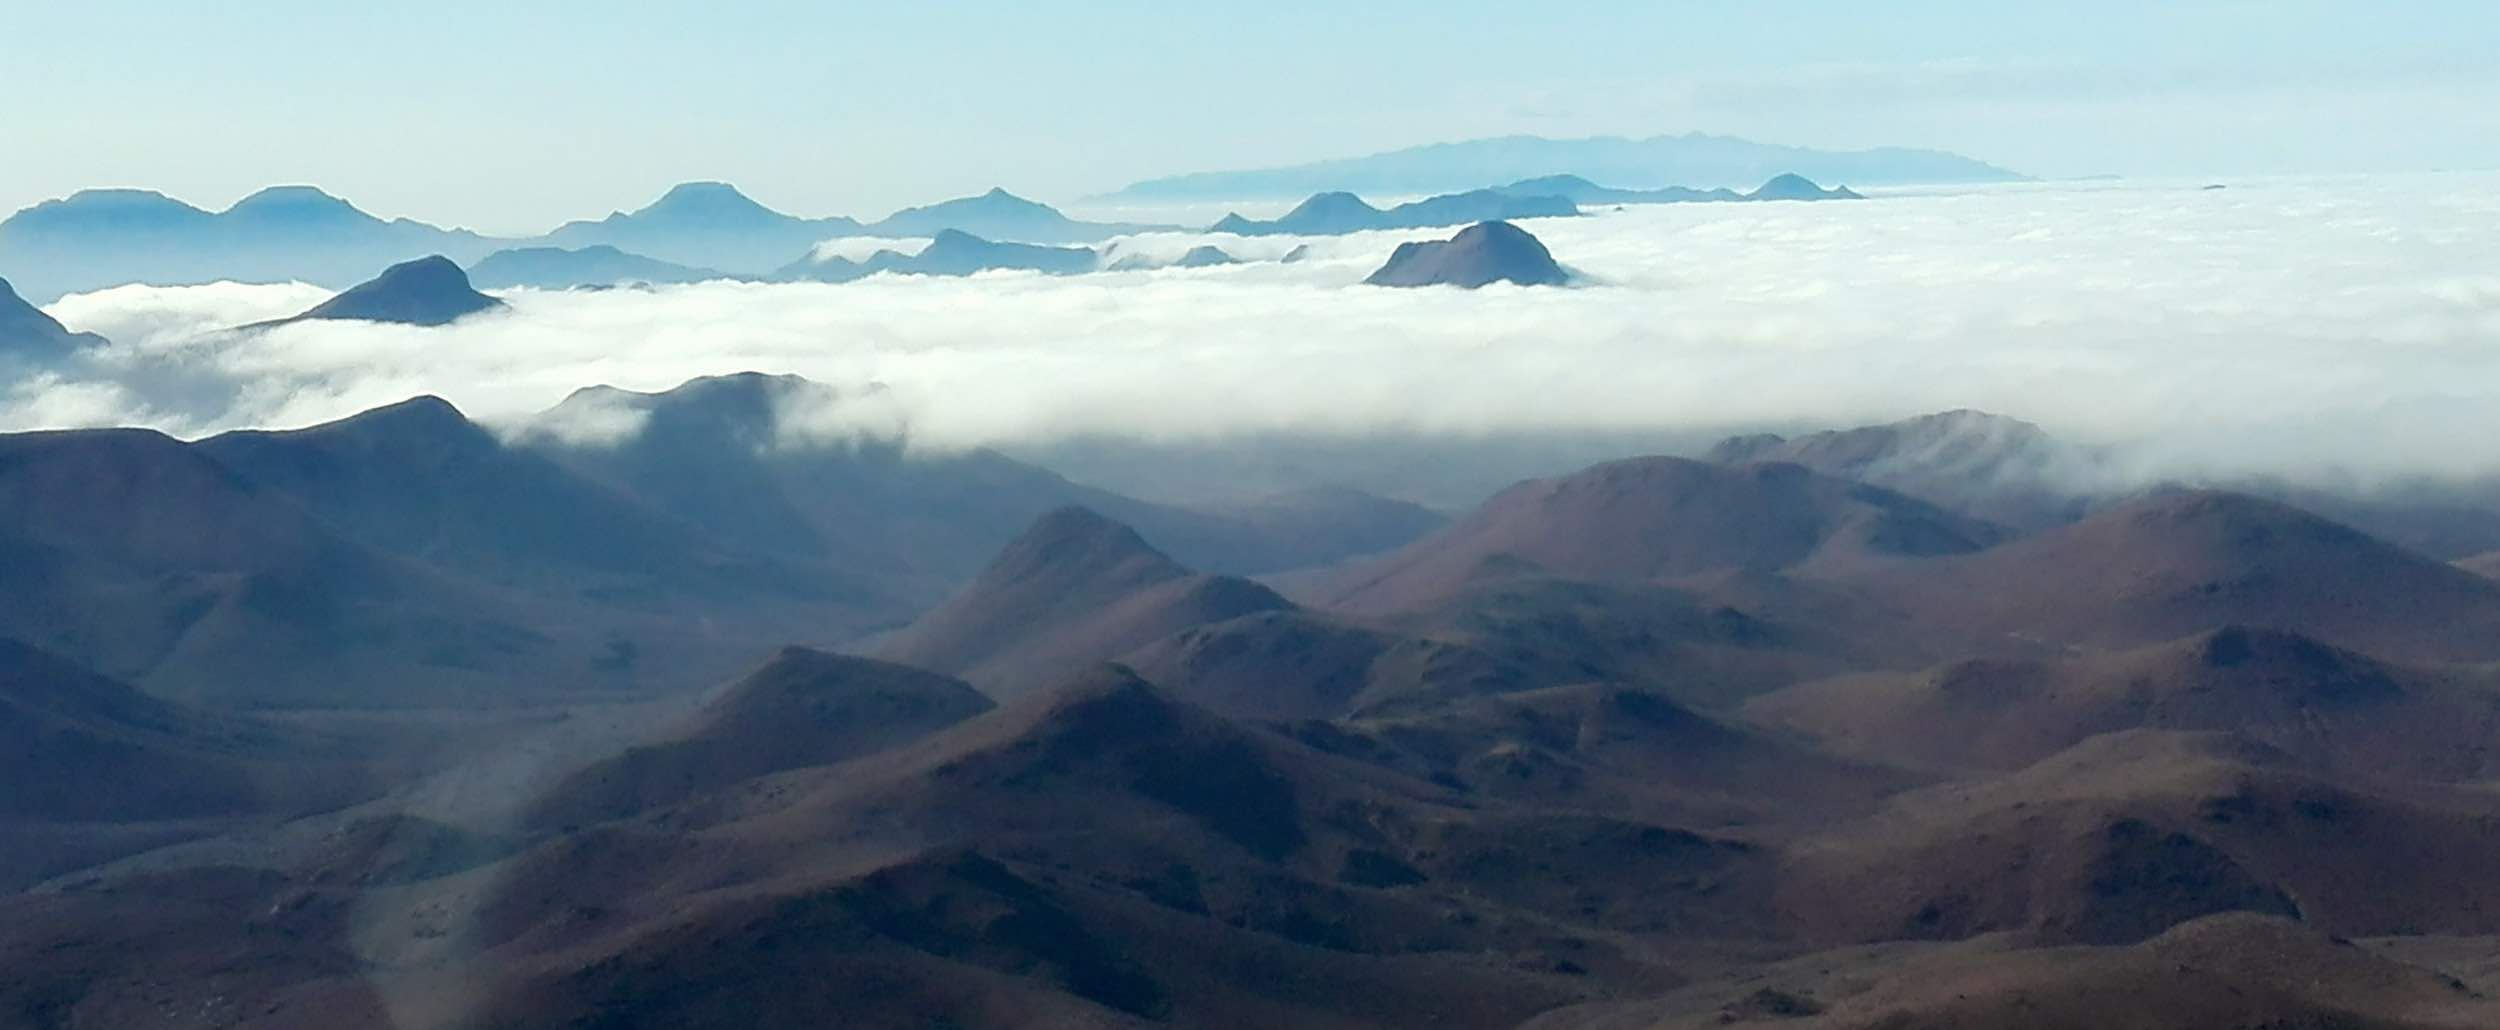 An aerial view of clouds hanging low over a mountain range in Namibia.